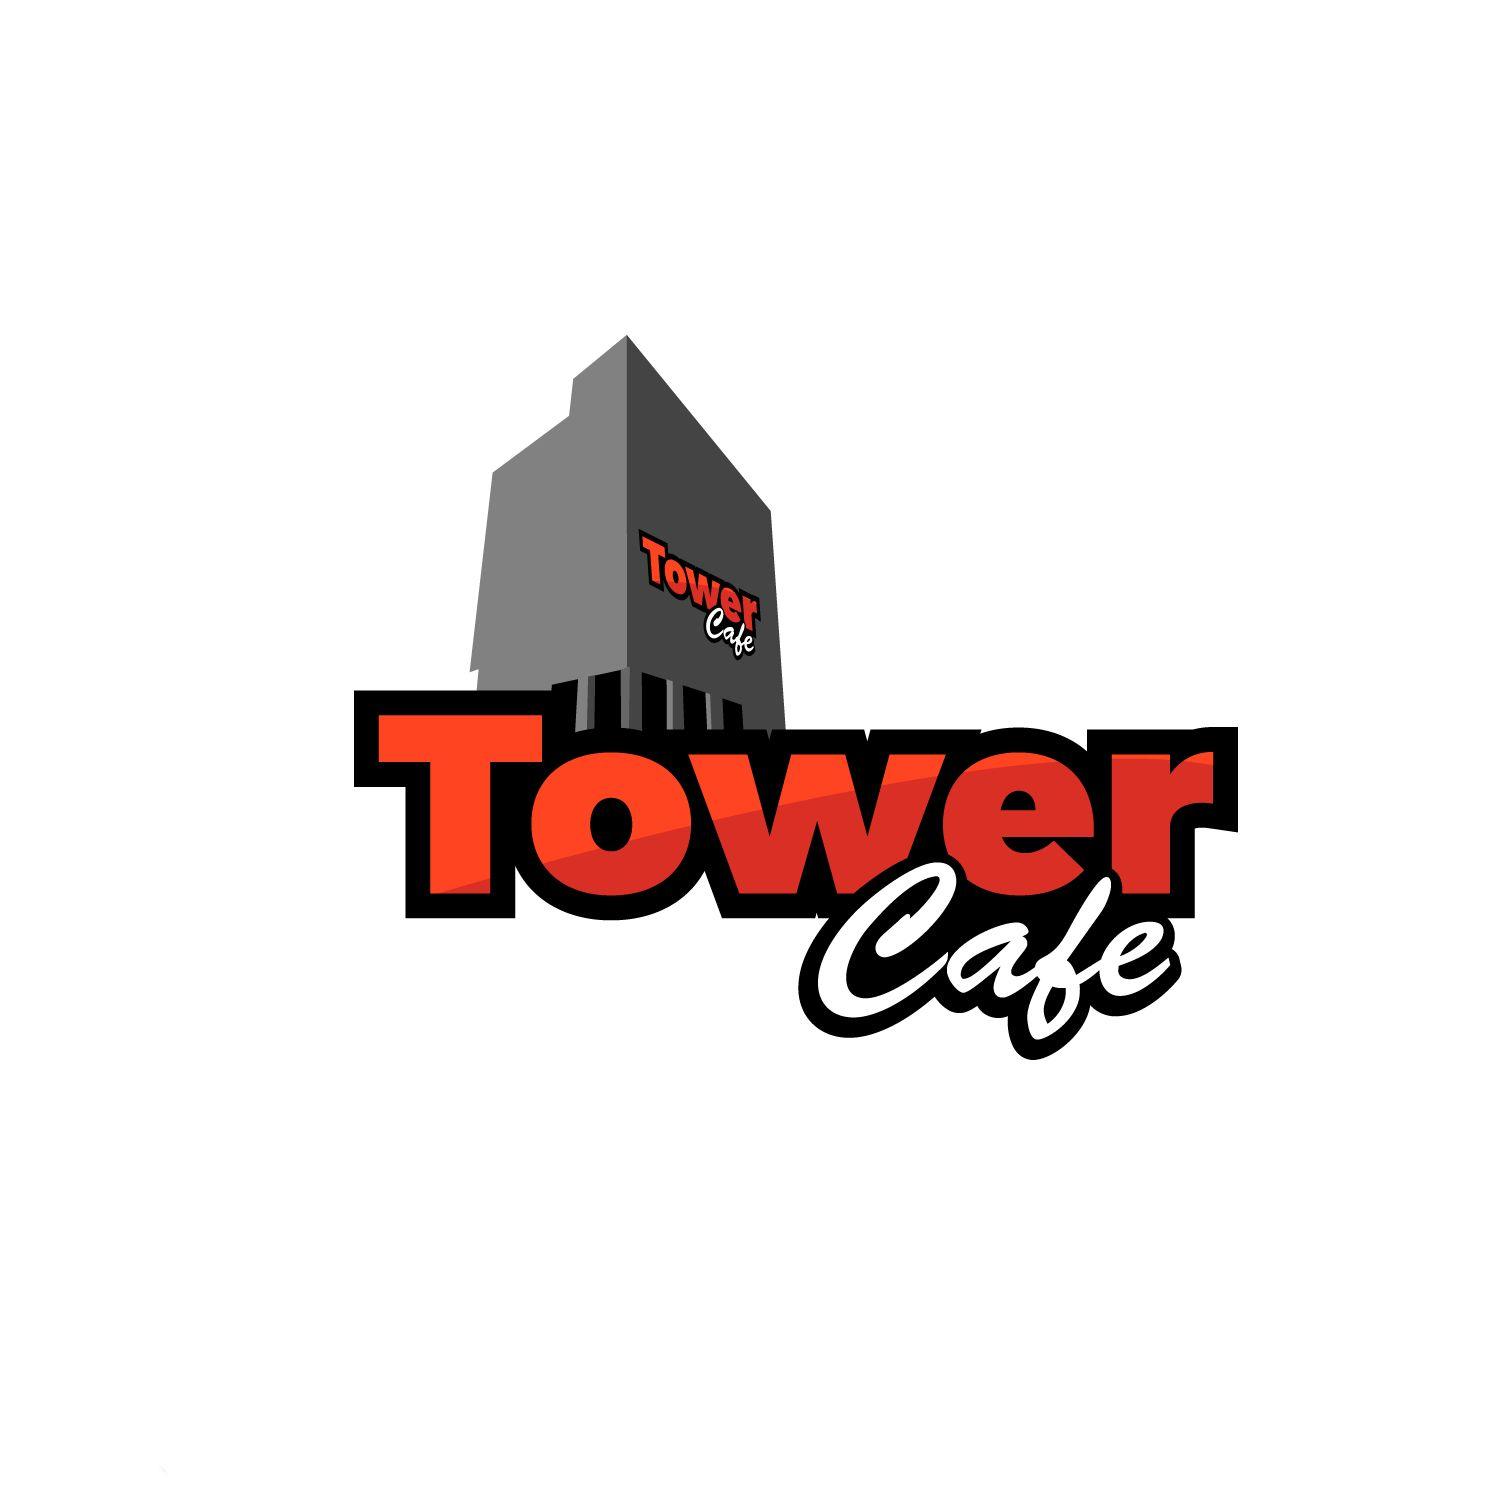 Lucky Grocery Store Logo - Professional, Elegant, Food Store Logo Design for Tower Cafe by TRHZ ...